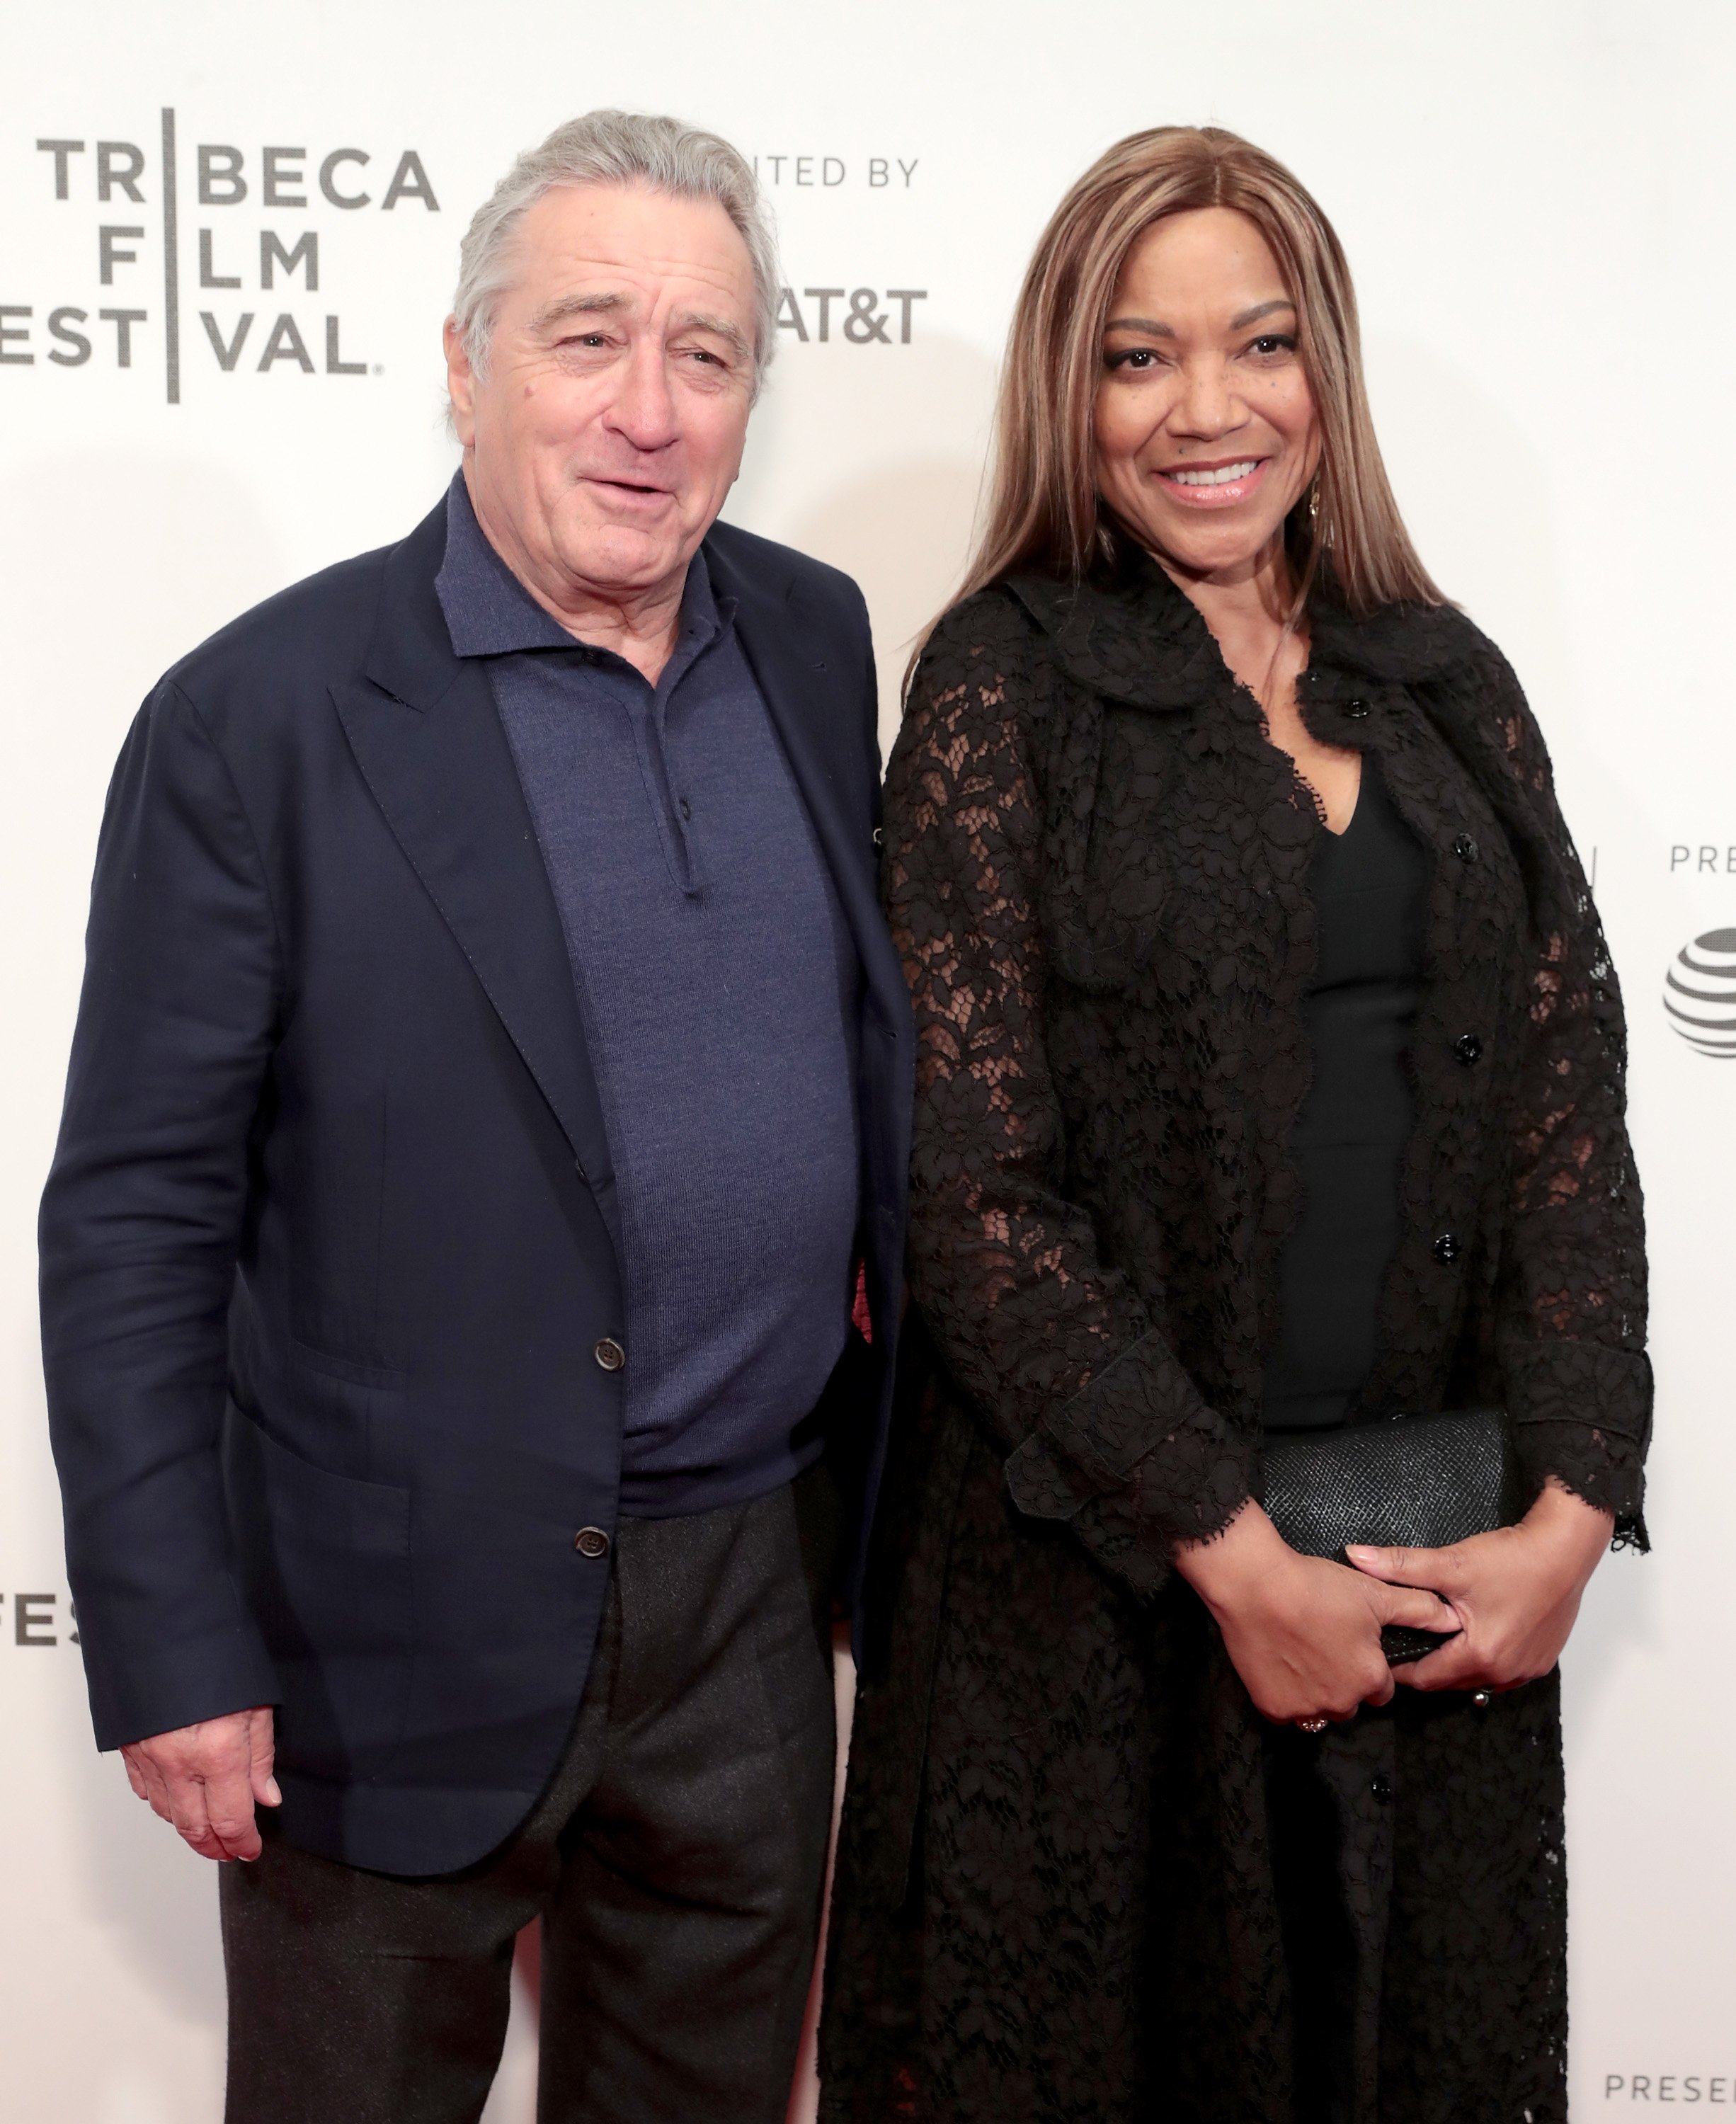 Roberto De Niro and Grace Hightower posing for a picture | Photo: Getty Images